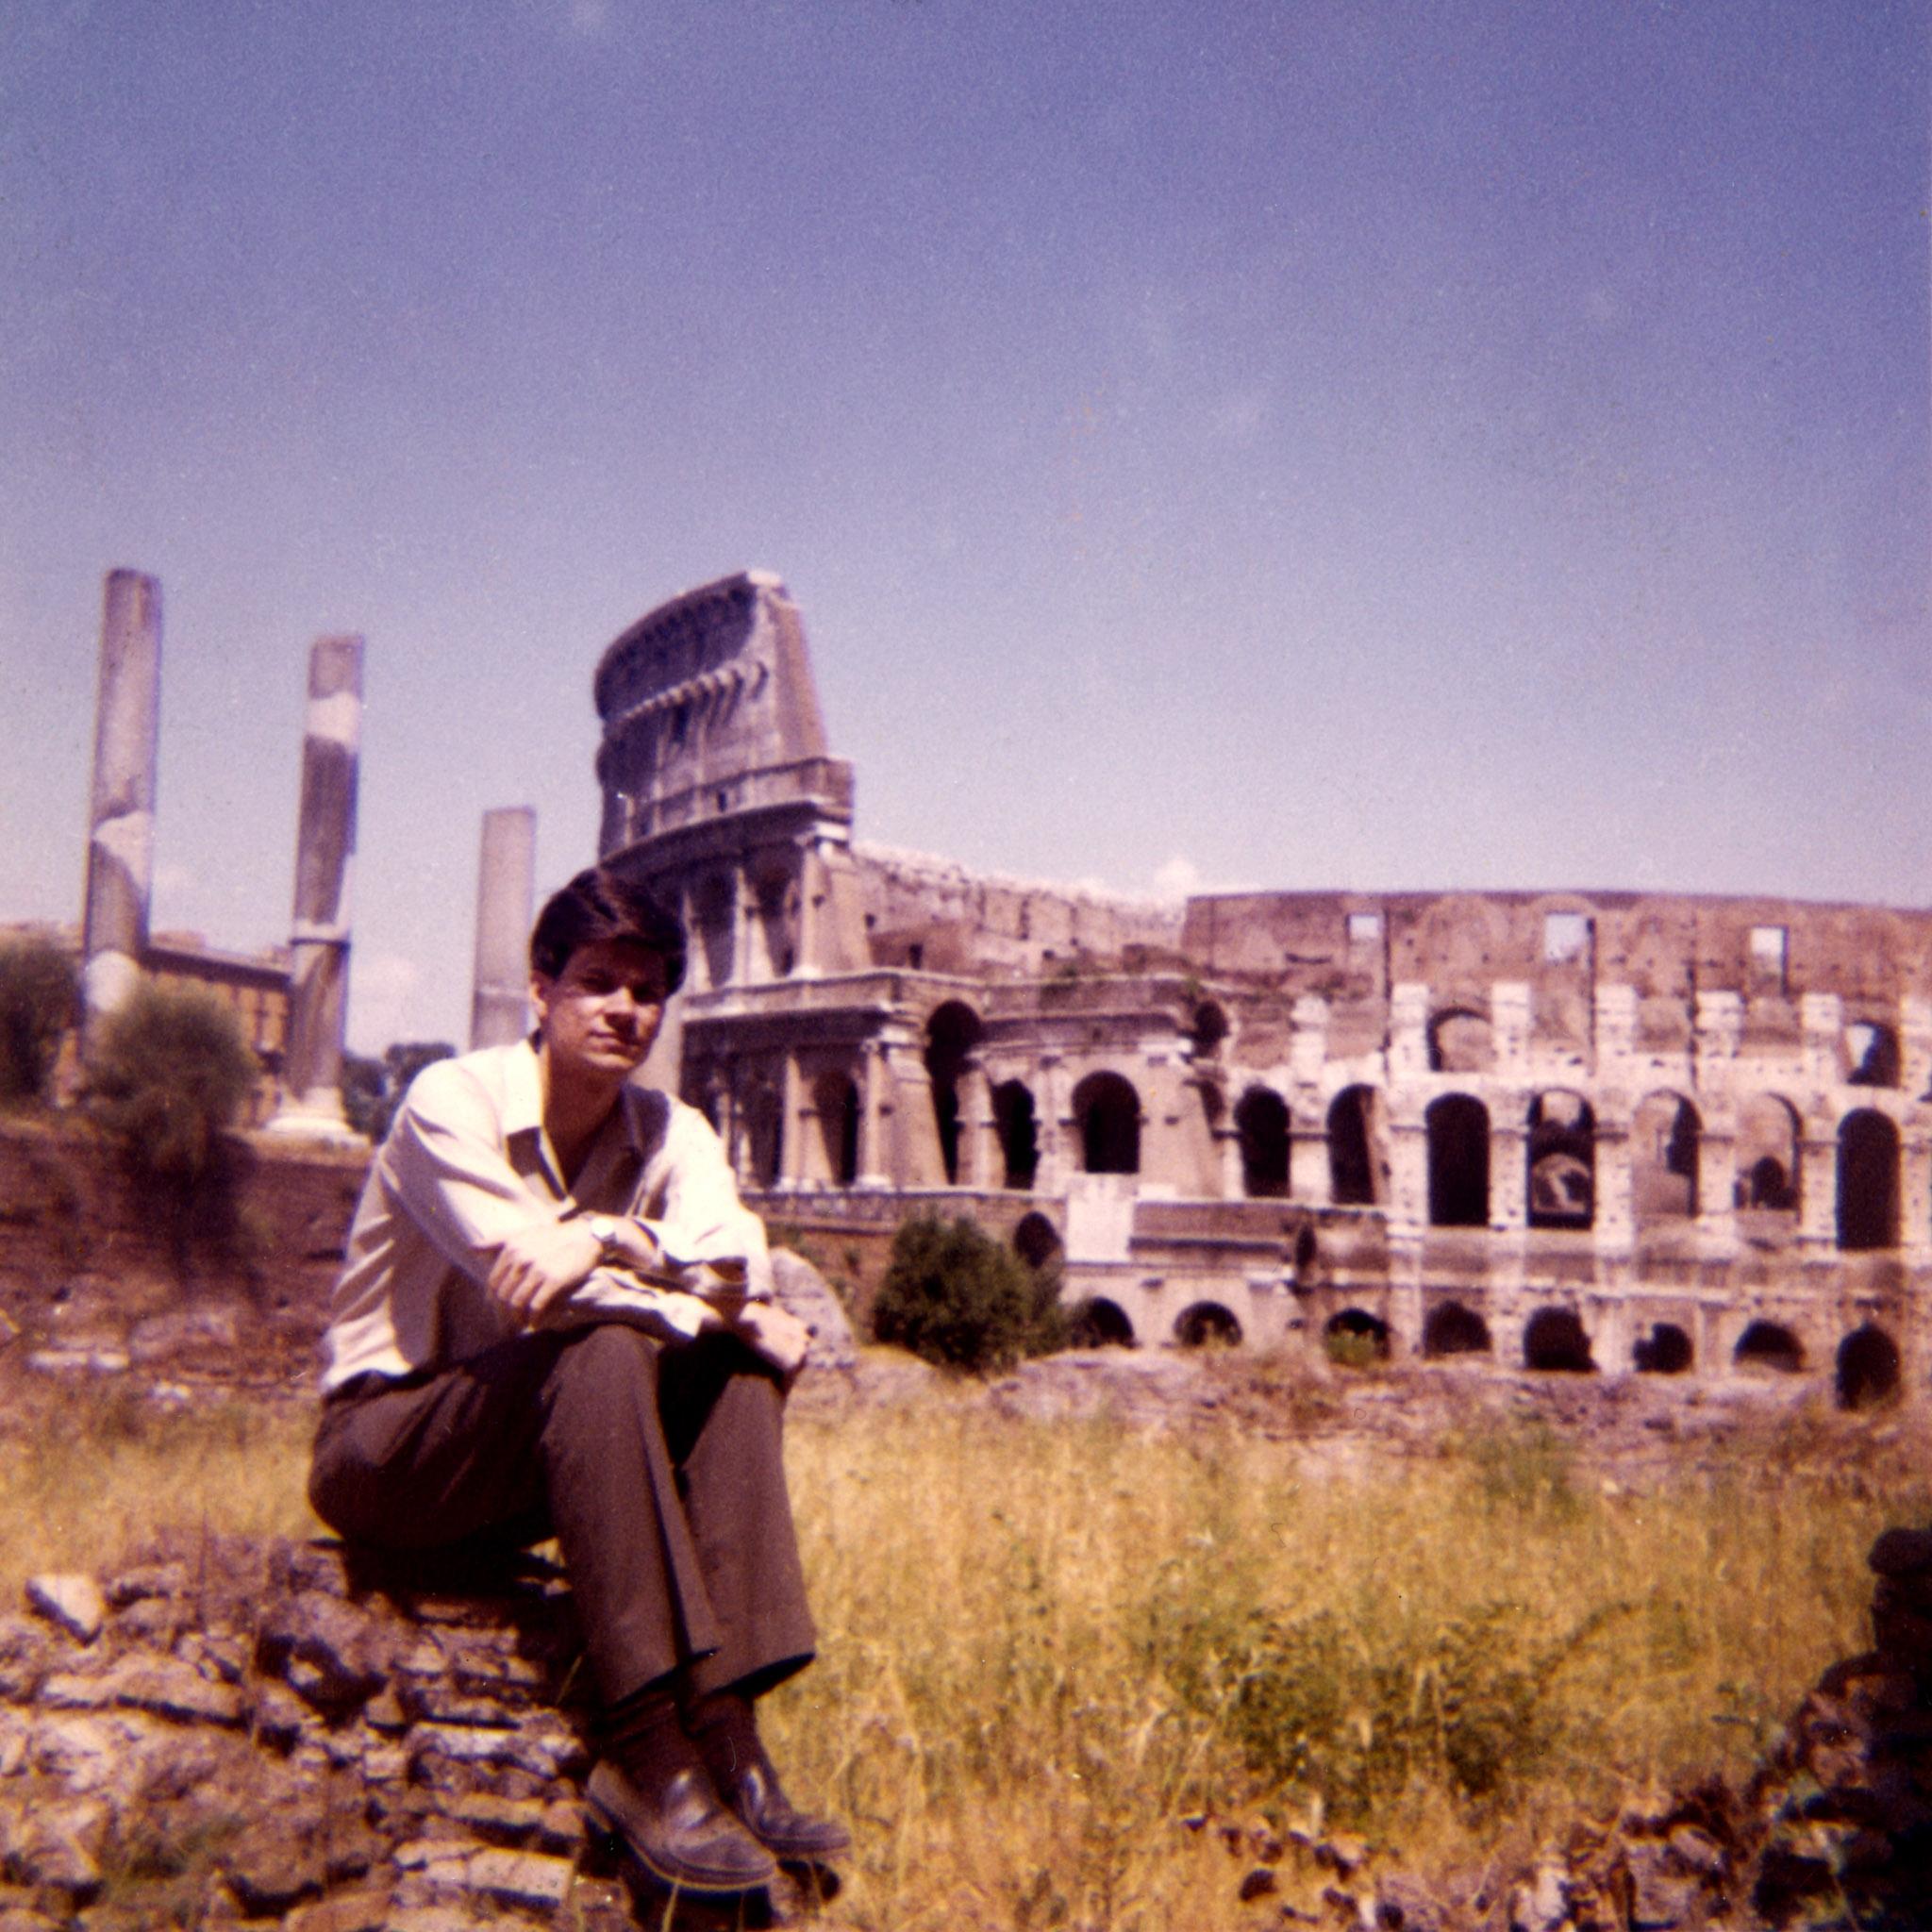 Robert Smithson seated outside the Colosseum in Rome